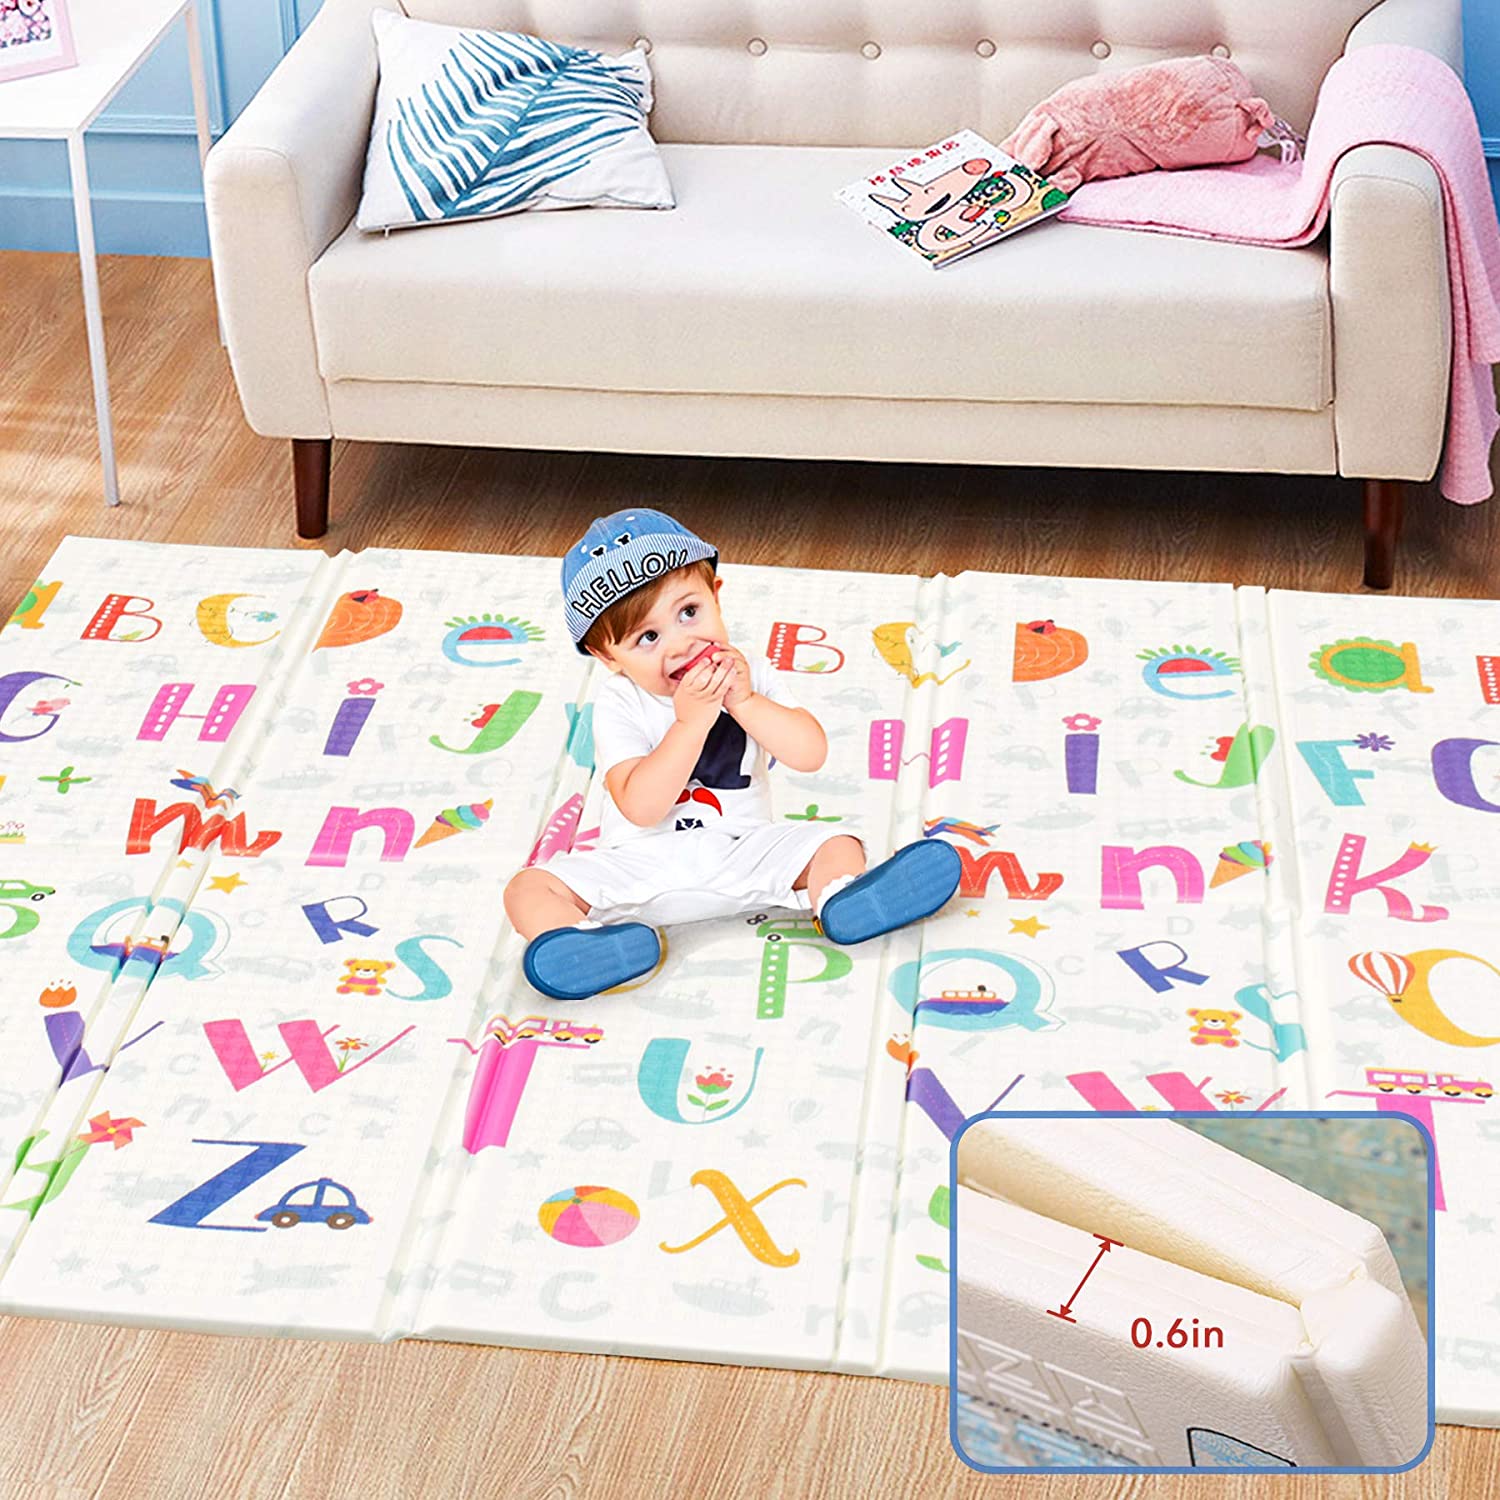 New Fashion Design for Rubber Mat For Baby - Foldable Baby Play Mat 0.6 Inch Thick Waterproof Baby Crawling Mat 79” x 71” Extra Large Play Mats for Babies Reversible Multifunctional Mats (Letter) ...